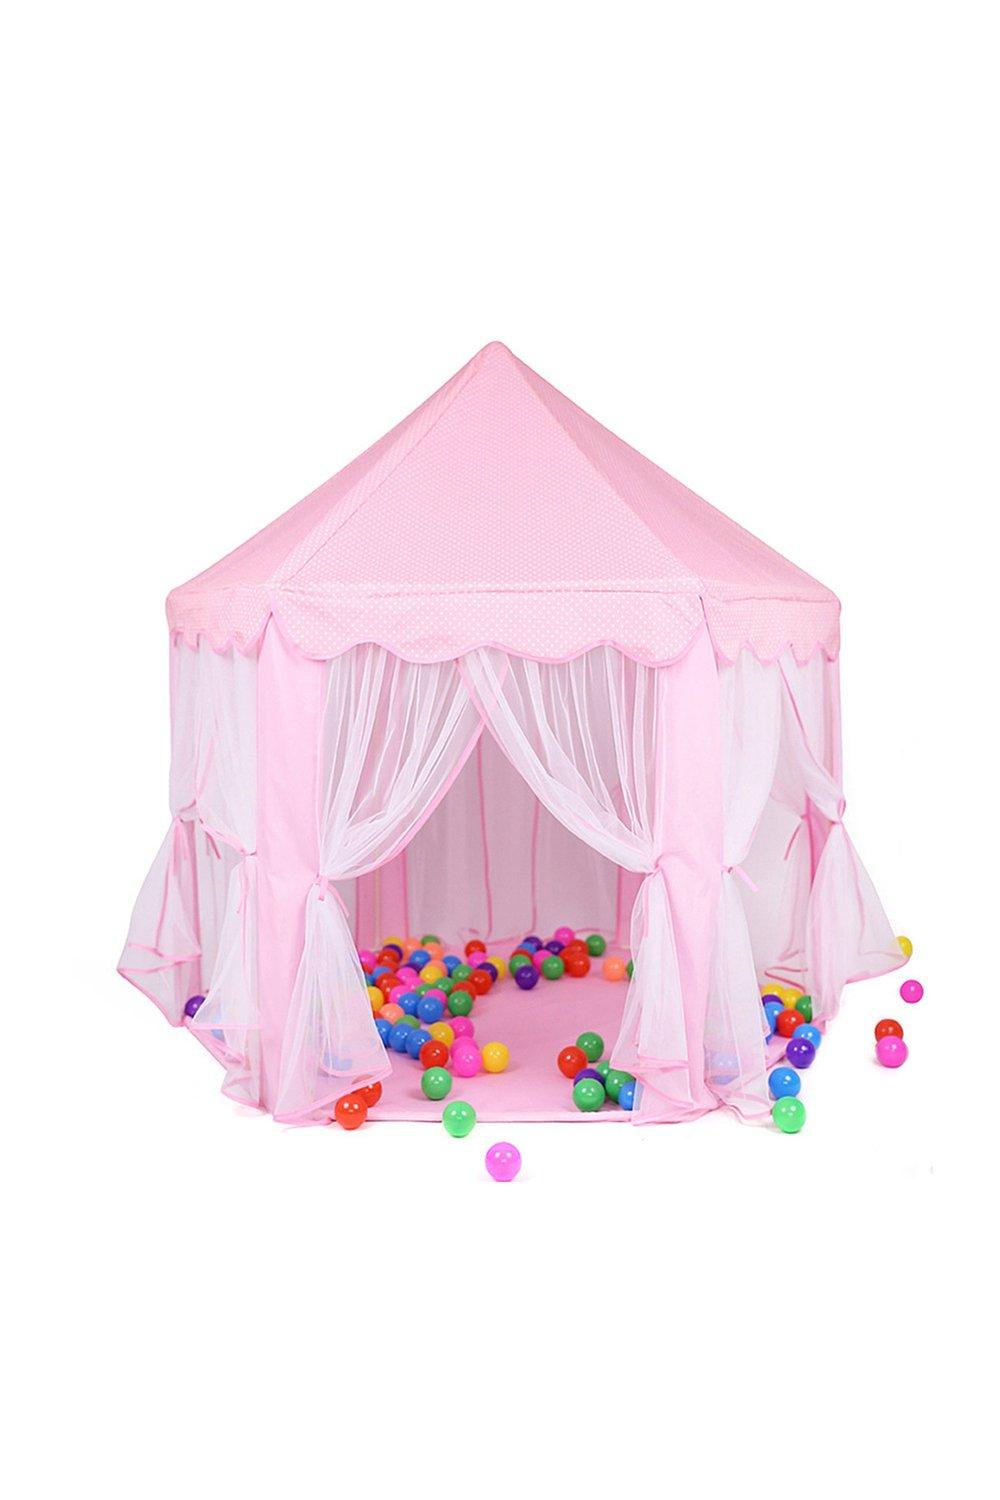 Large Fairy Play House Indoor Tent for Kids